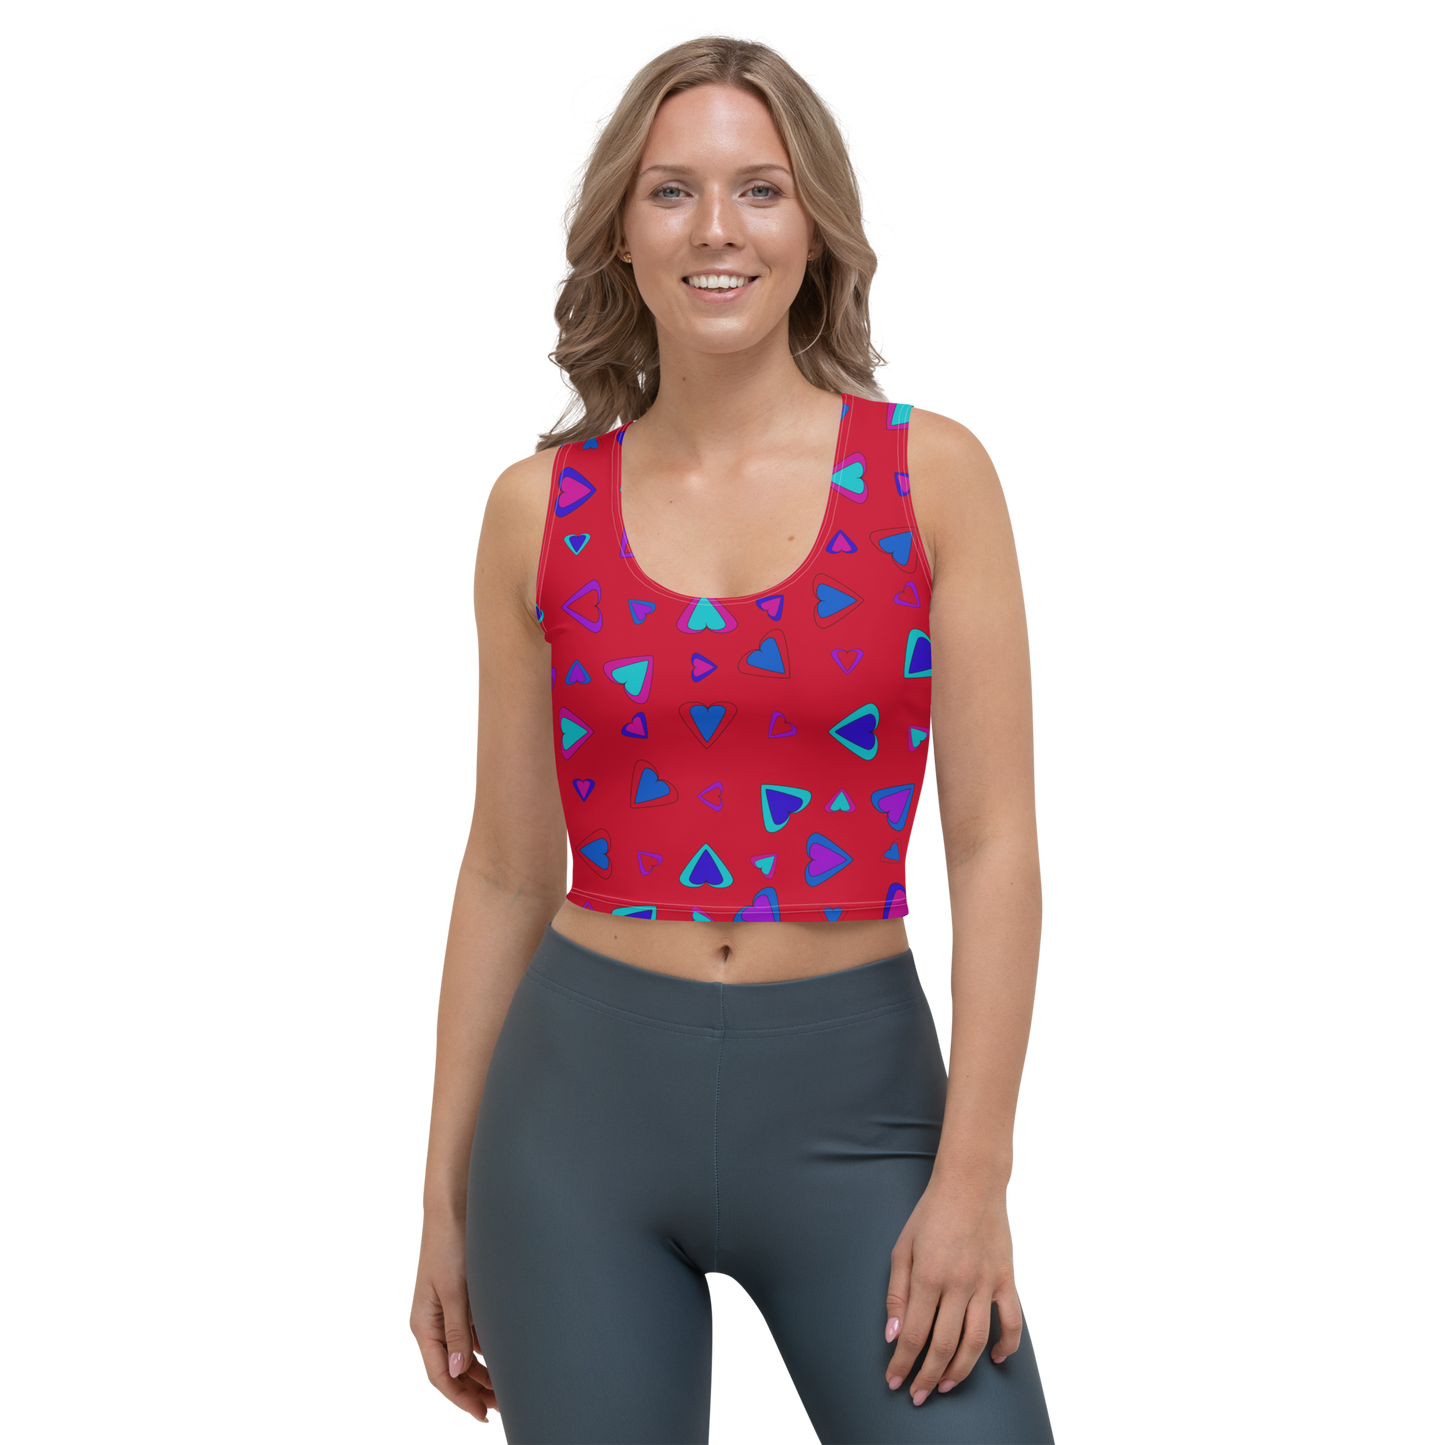 Rainbow Of Hearts | Batch 01 | Seamless Patterns | All-Over Print Crop Top - #1